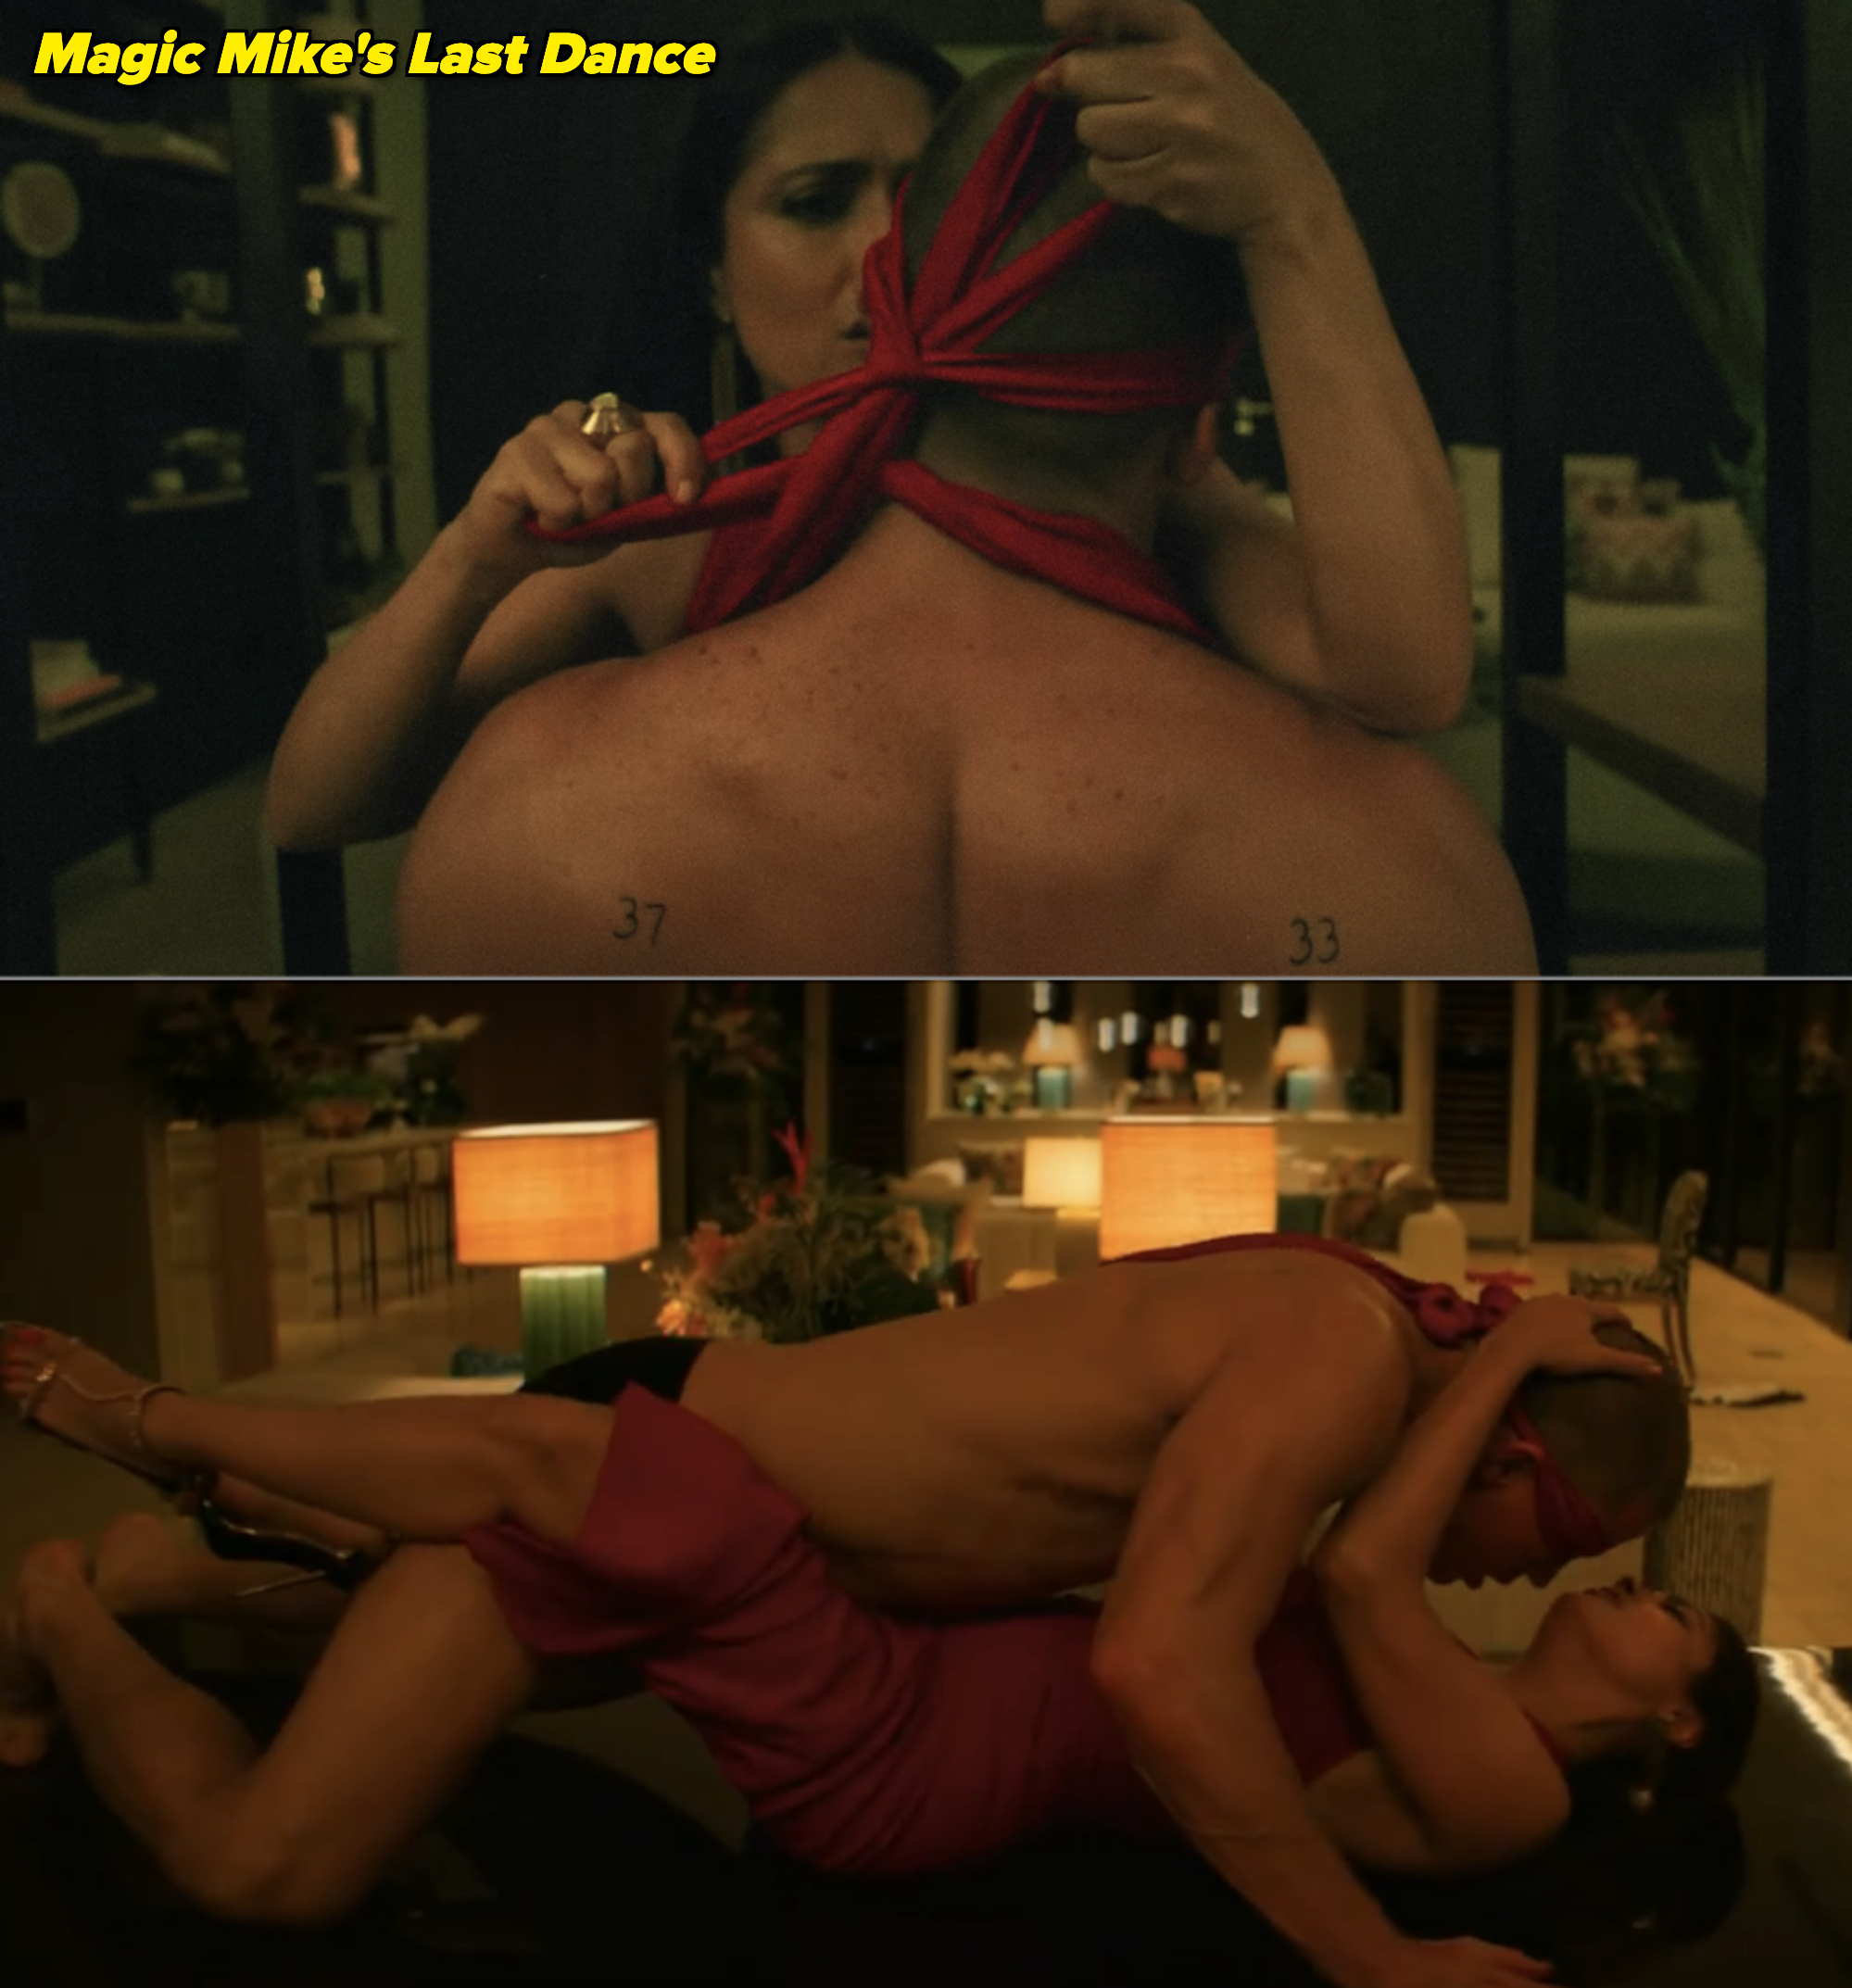 Salma Hayek and Channing Tatum hooking up in &quot;Magic Mike&#x27;s Last Dance&quot;